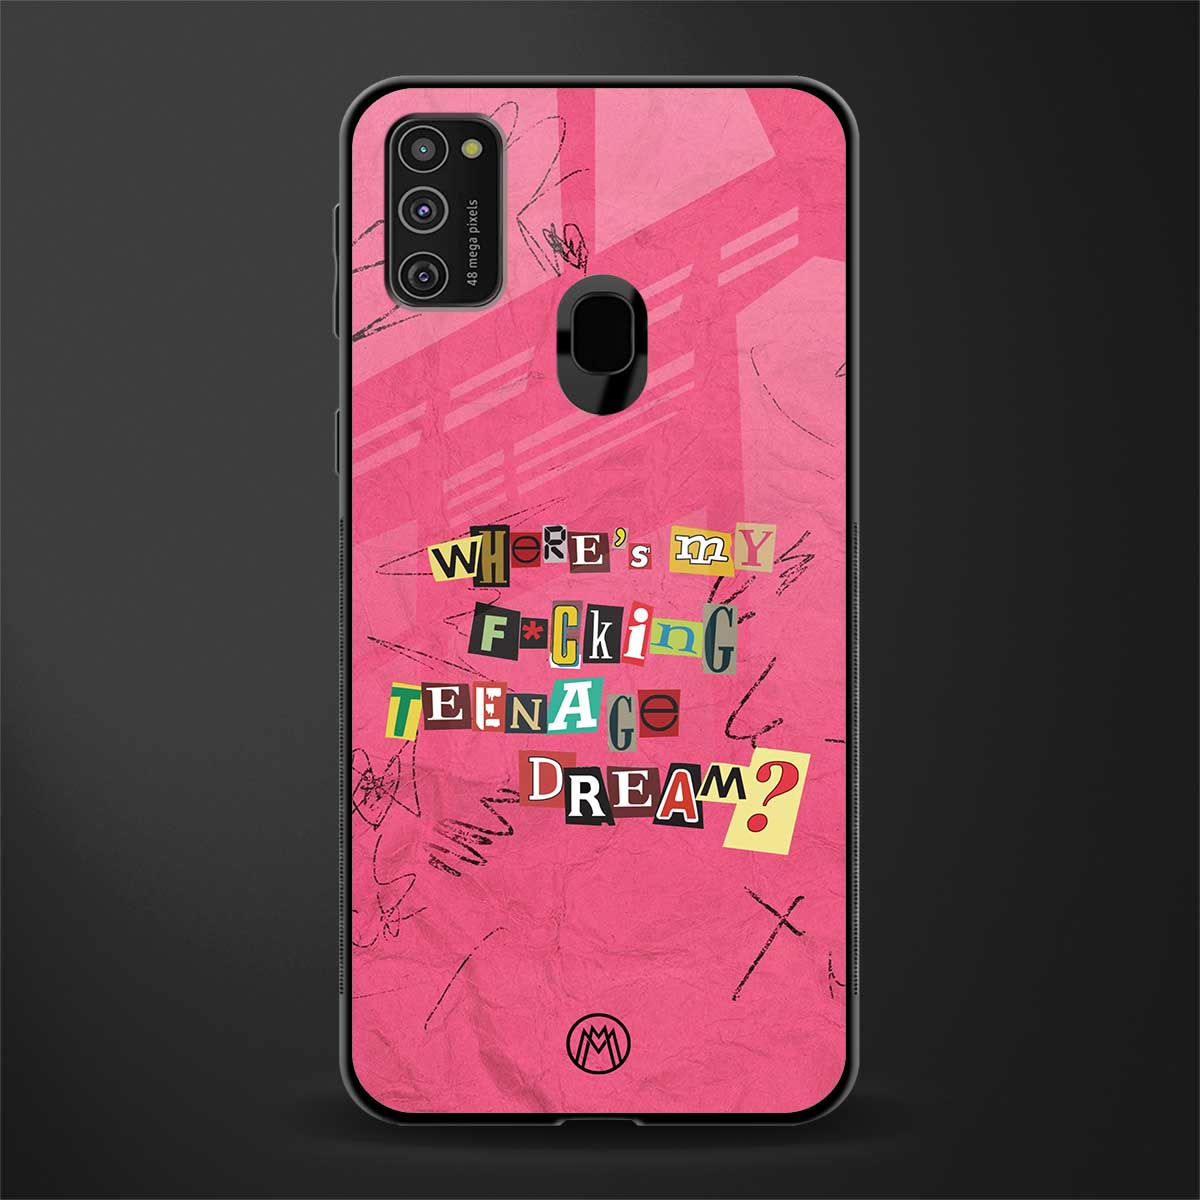 teenage dream glass case for samsung galaxy m30s image